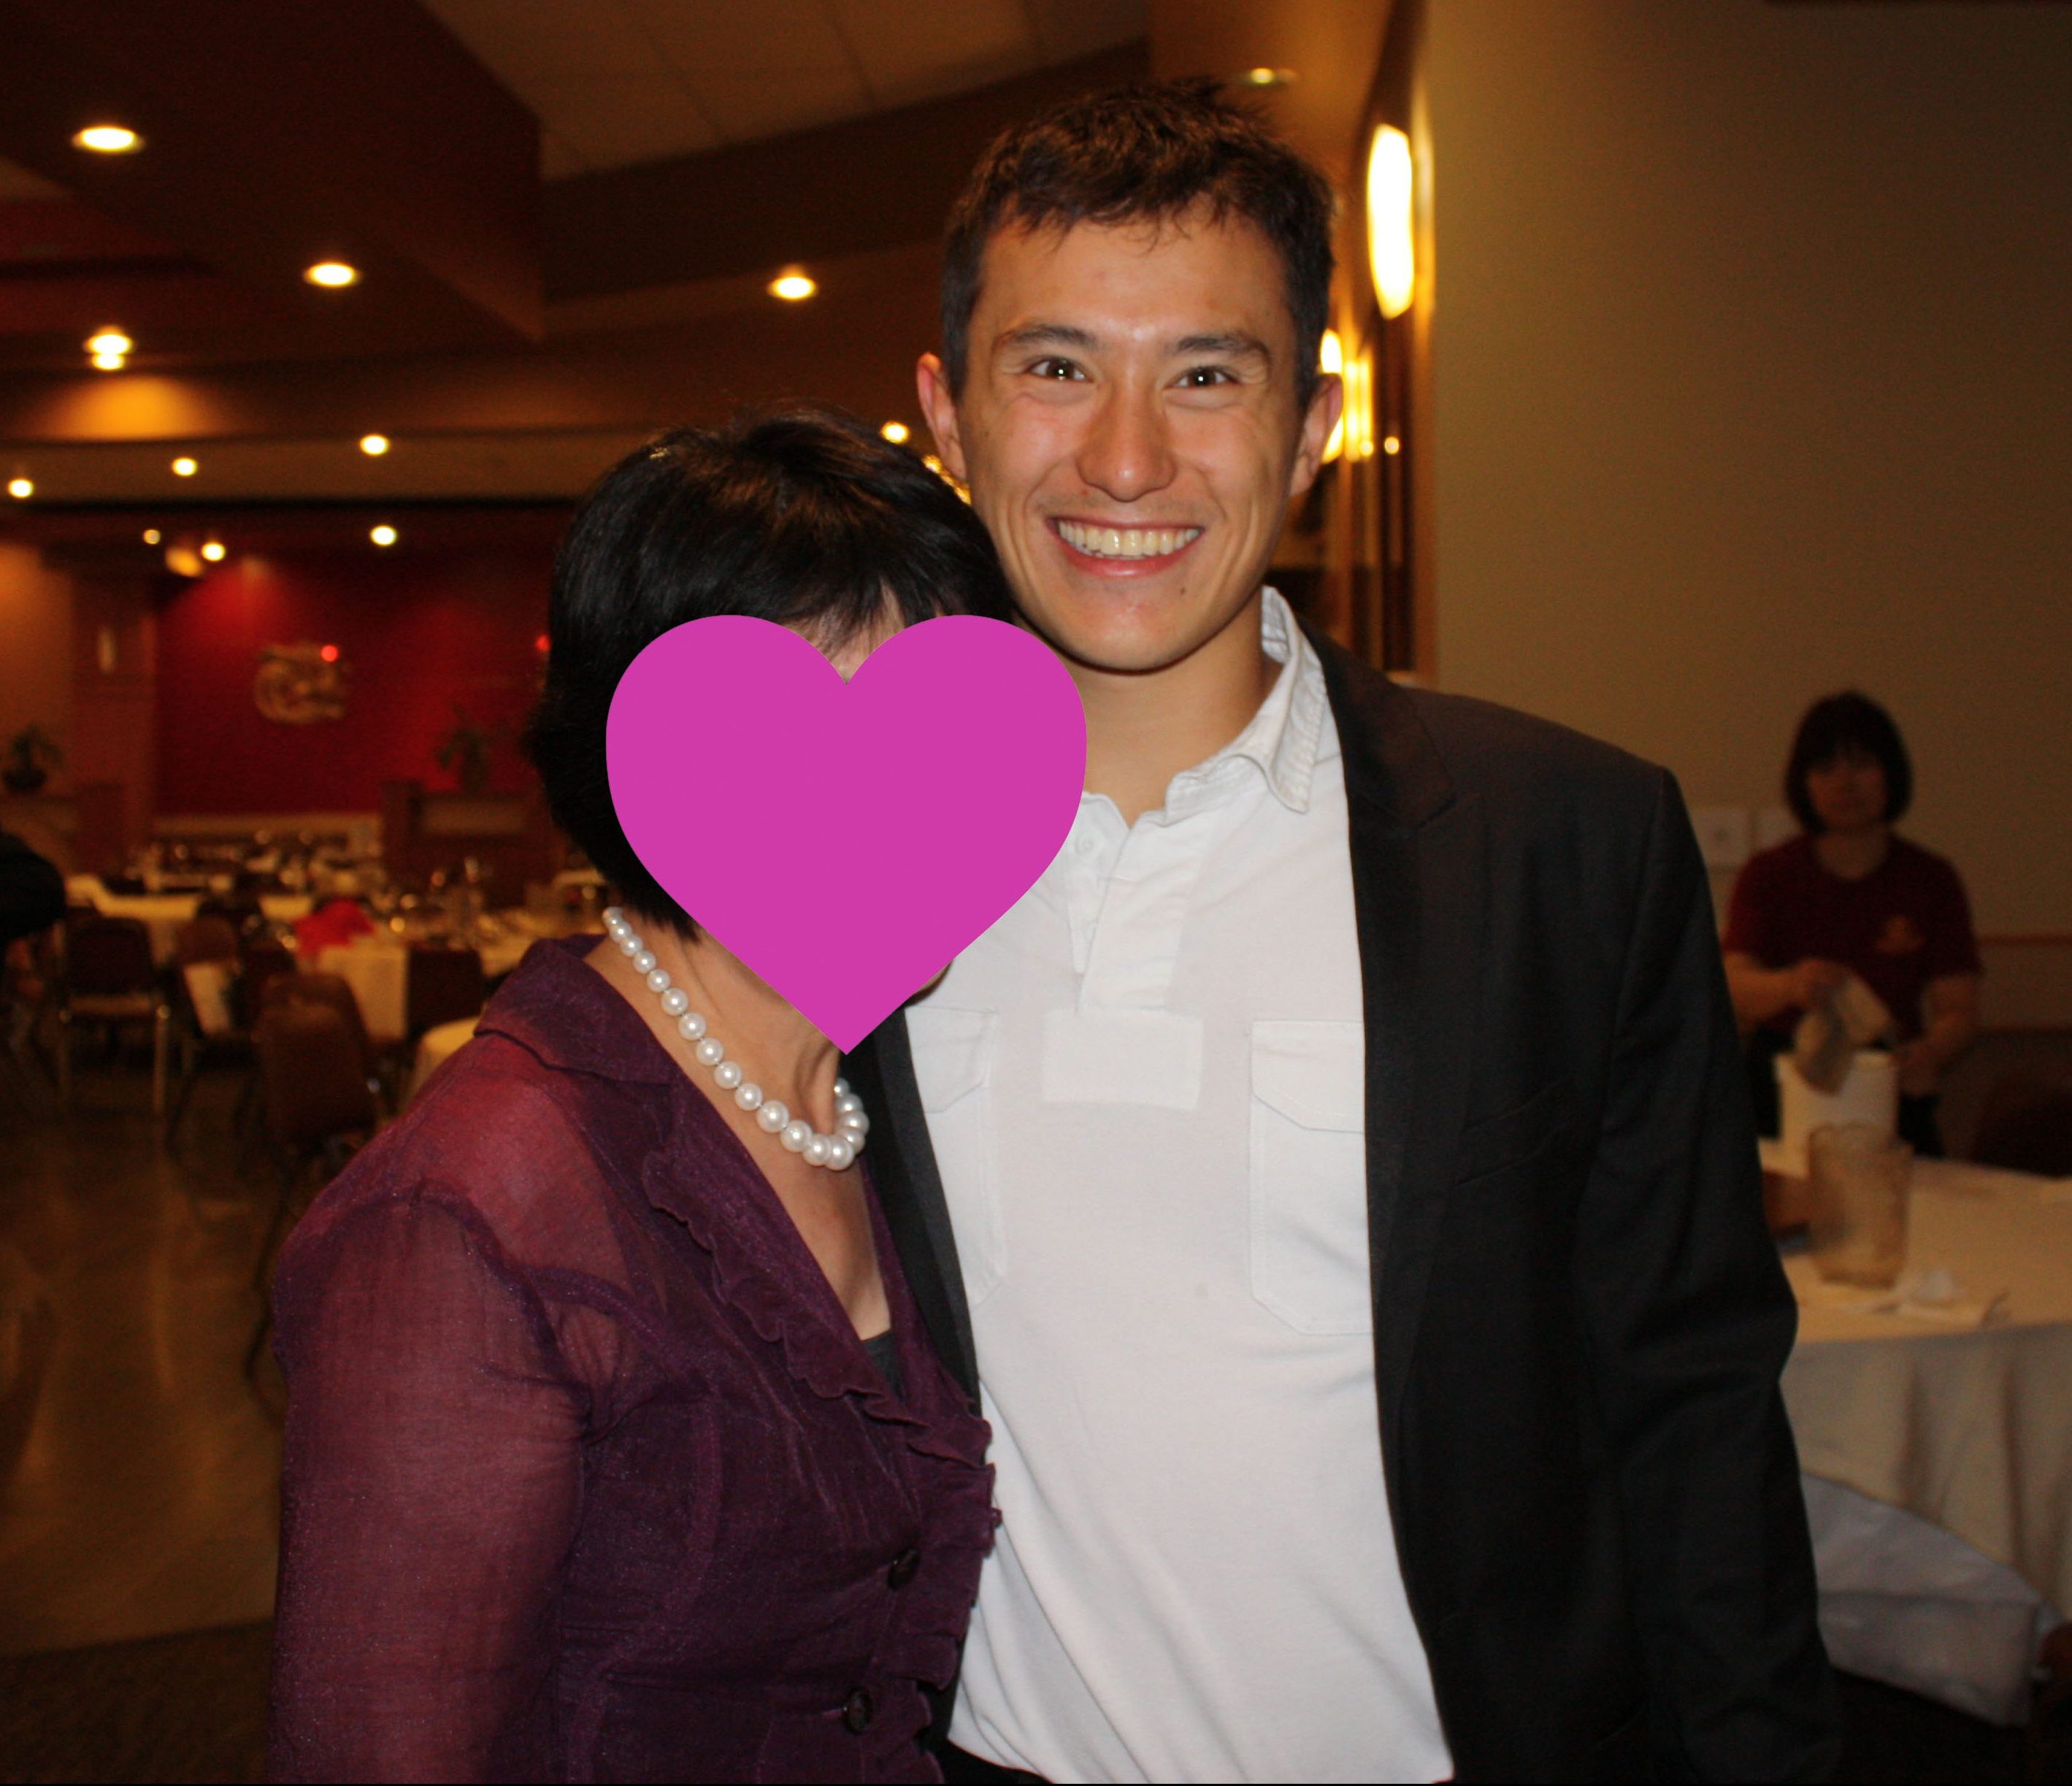 Patrick Chan fan Happylife hugs and poses with a happy Patrick at a restaurant, May 2012. (Photo © Happylife. Used with permission.)